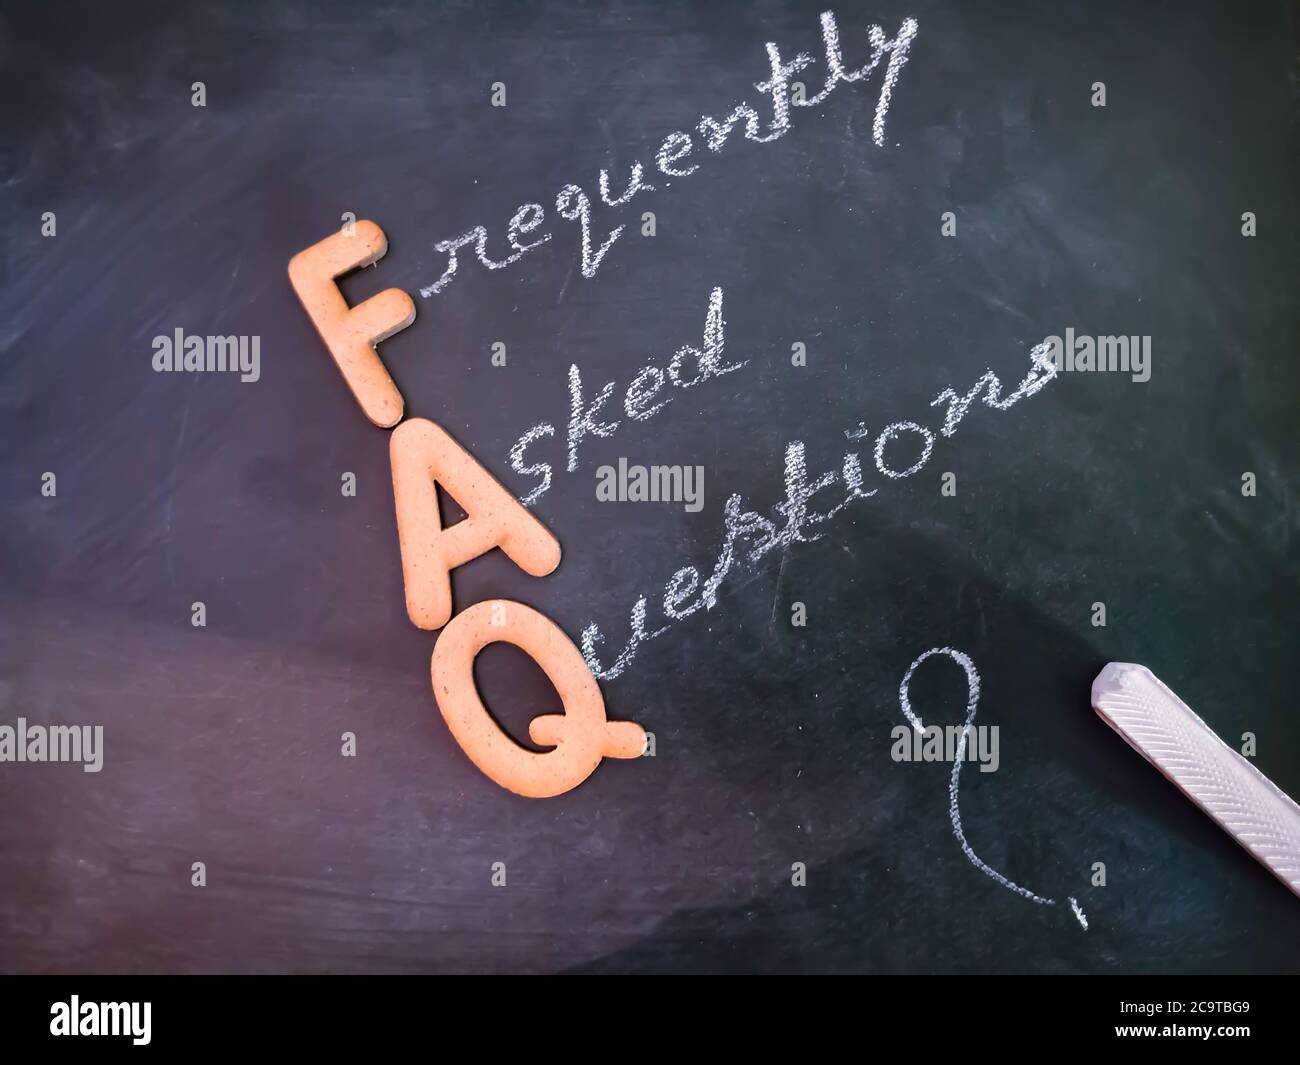 Frequently ask question text presented for active business education concept on chalkboard abstract background. Stock Photo